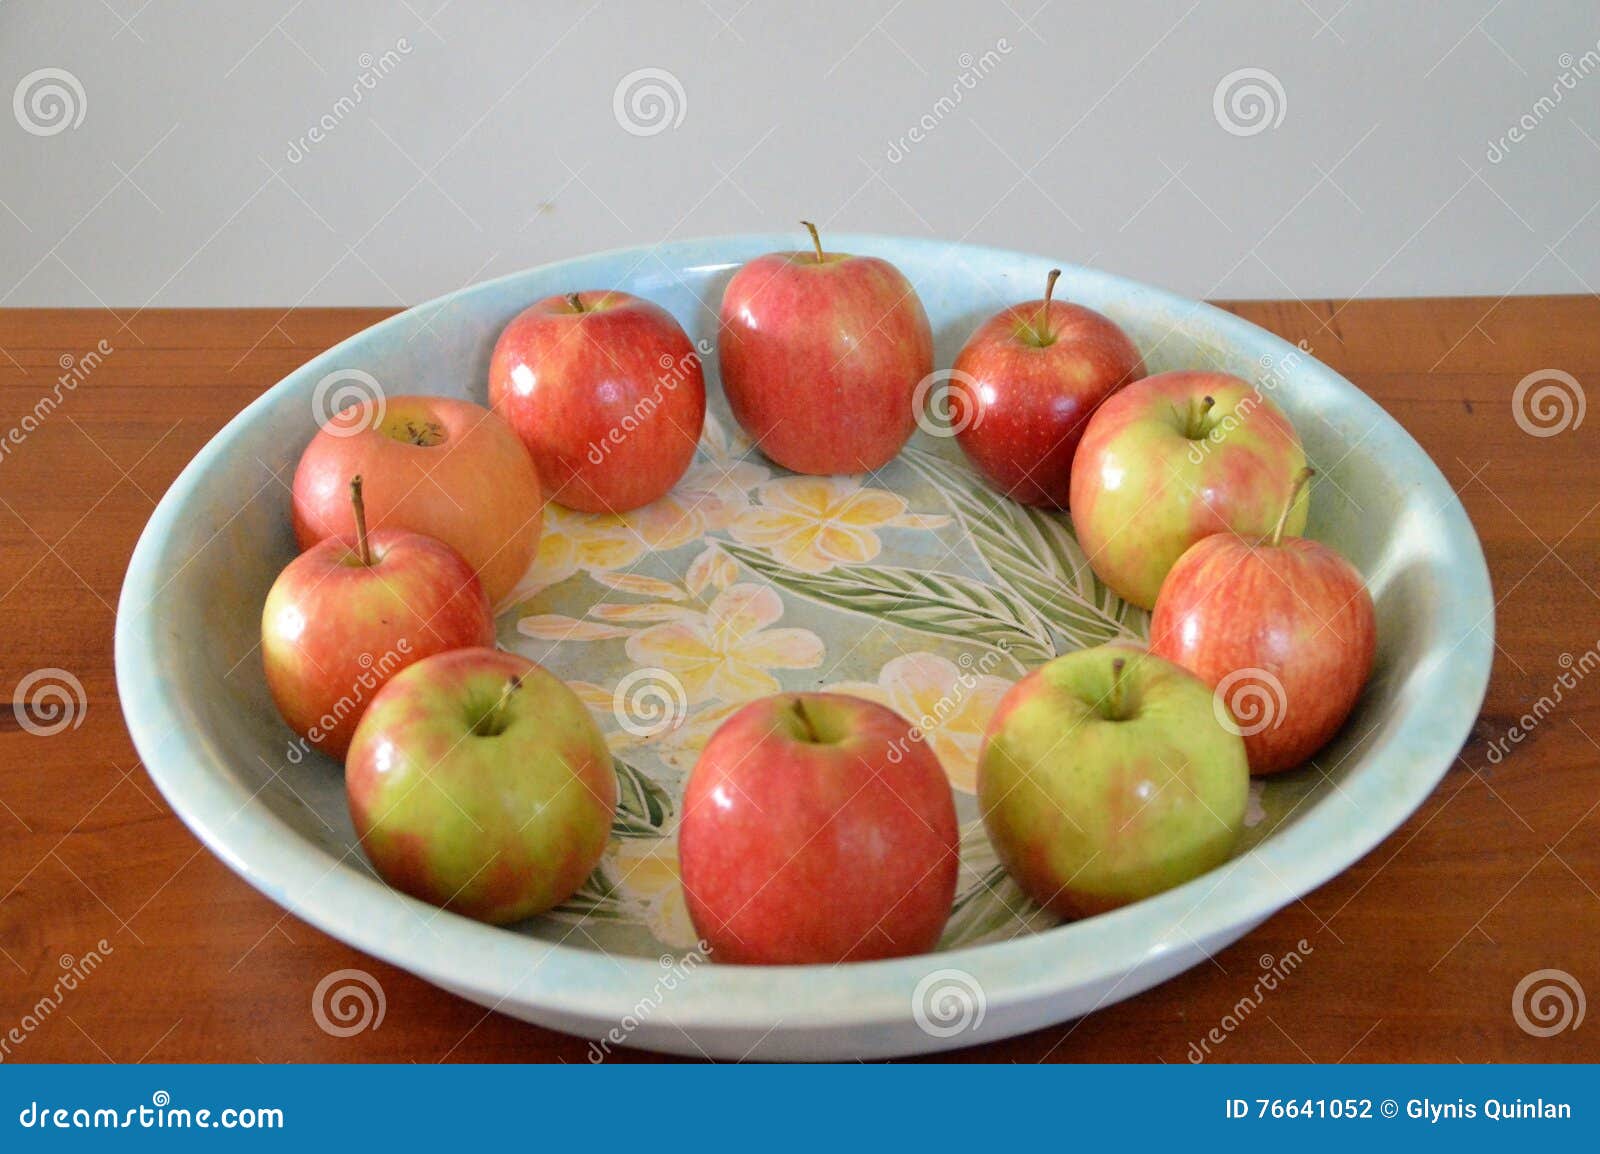 https://thumbs.dreamstime.com/z/comparing-apples-to-apples-fruit-bowl-full-apples-containing-depicts-concept-x-could-also-be-used-promote-76641052.jpg